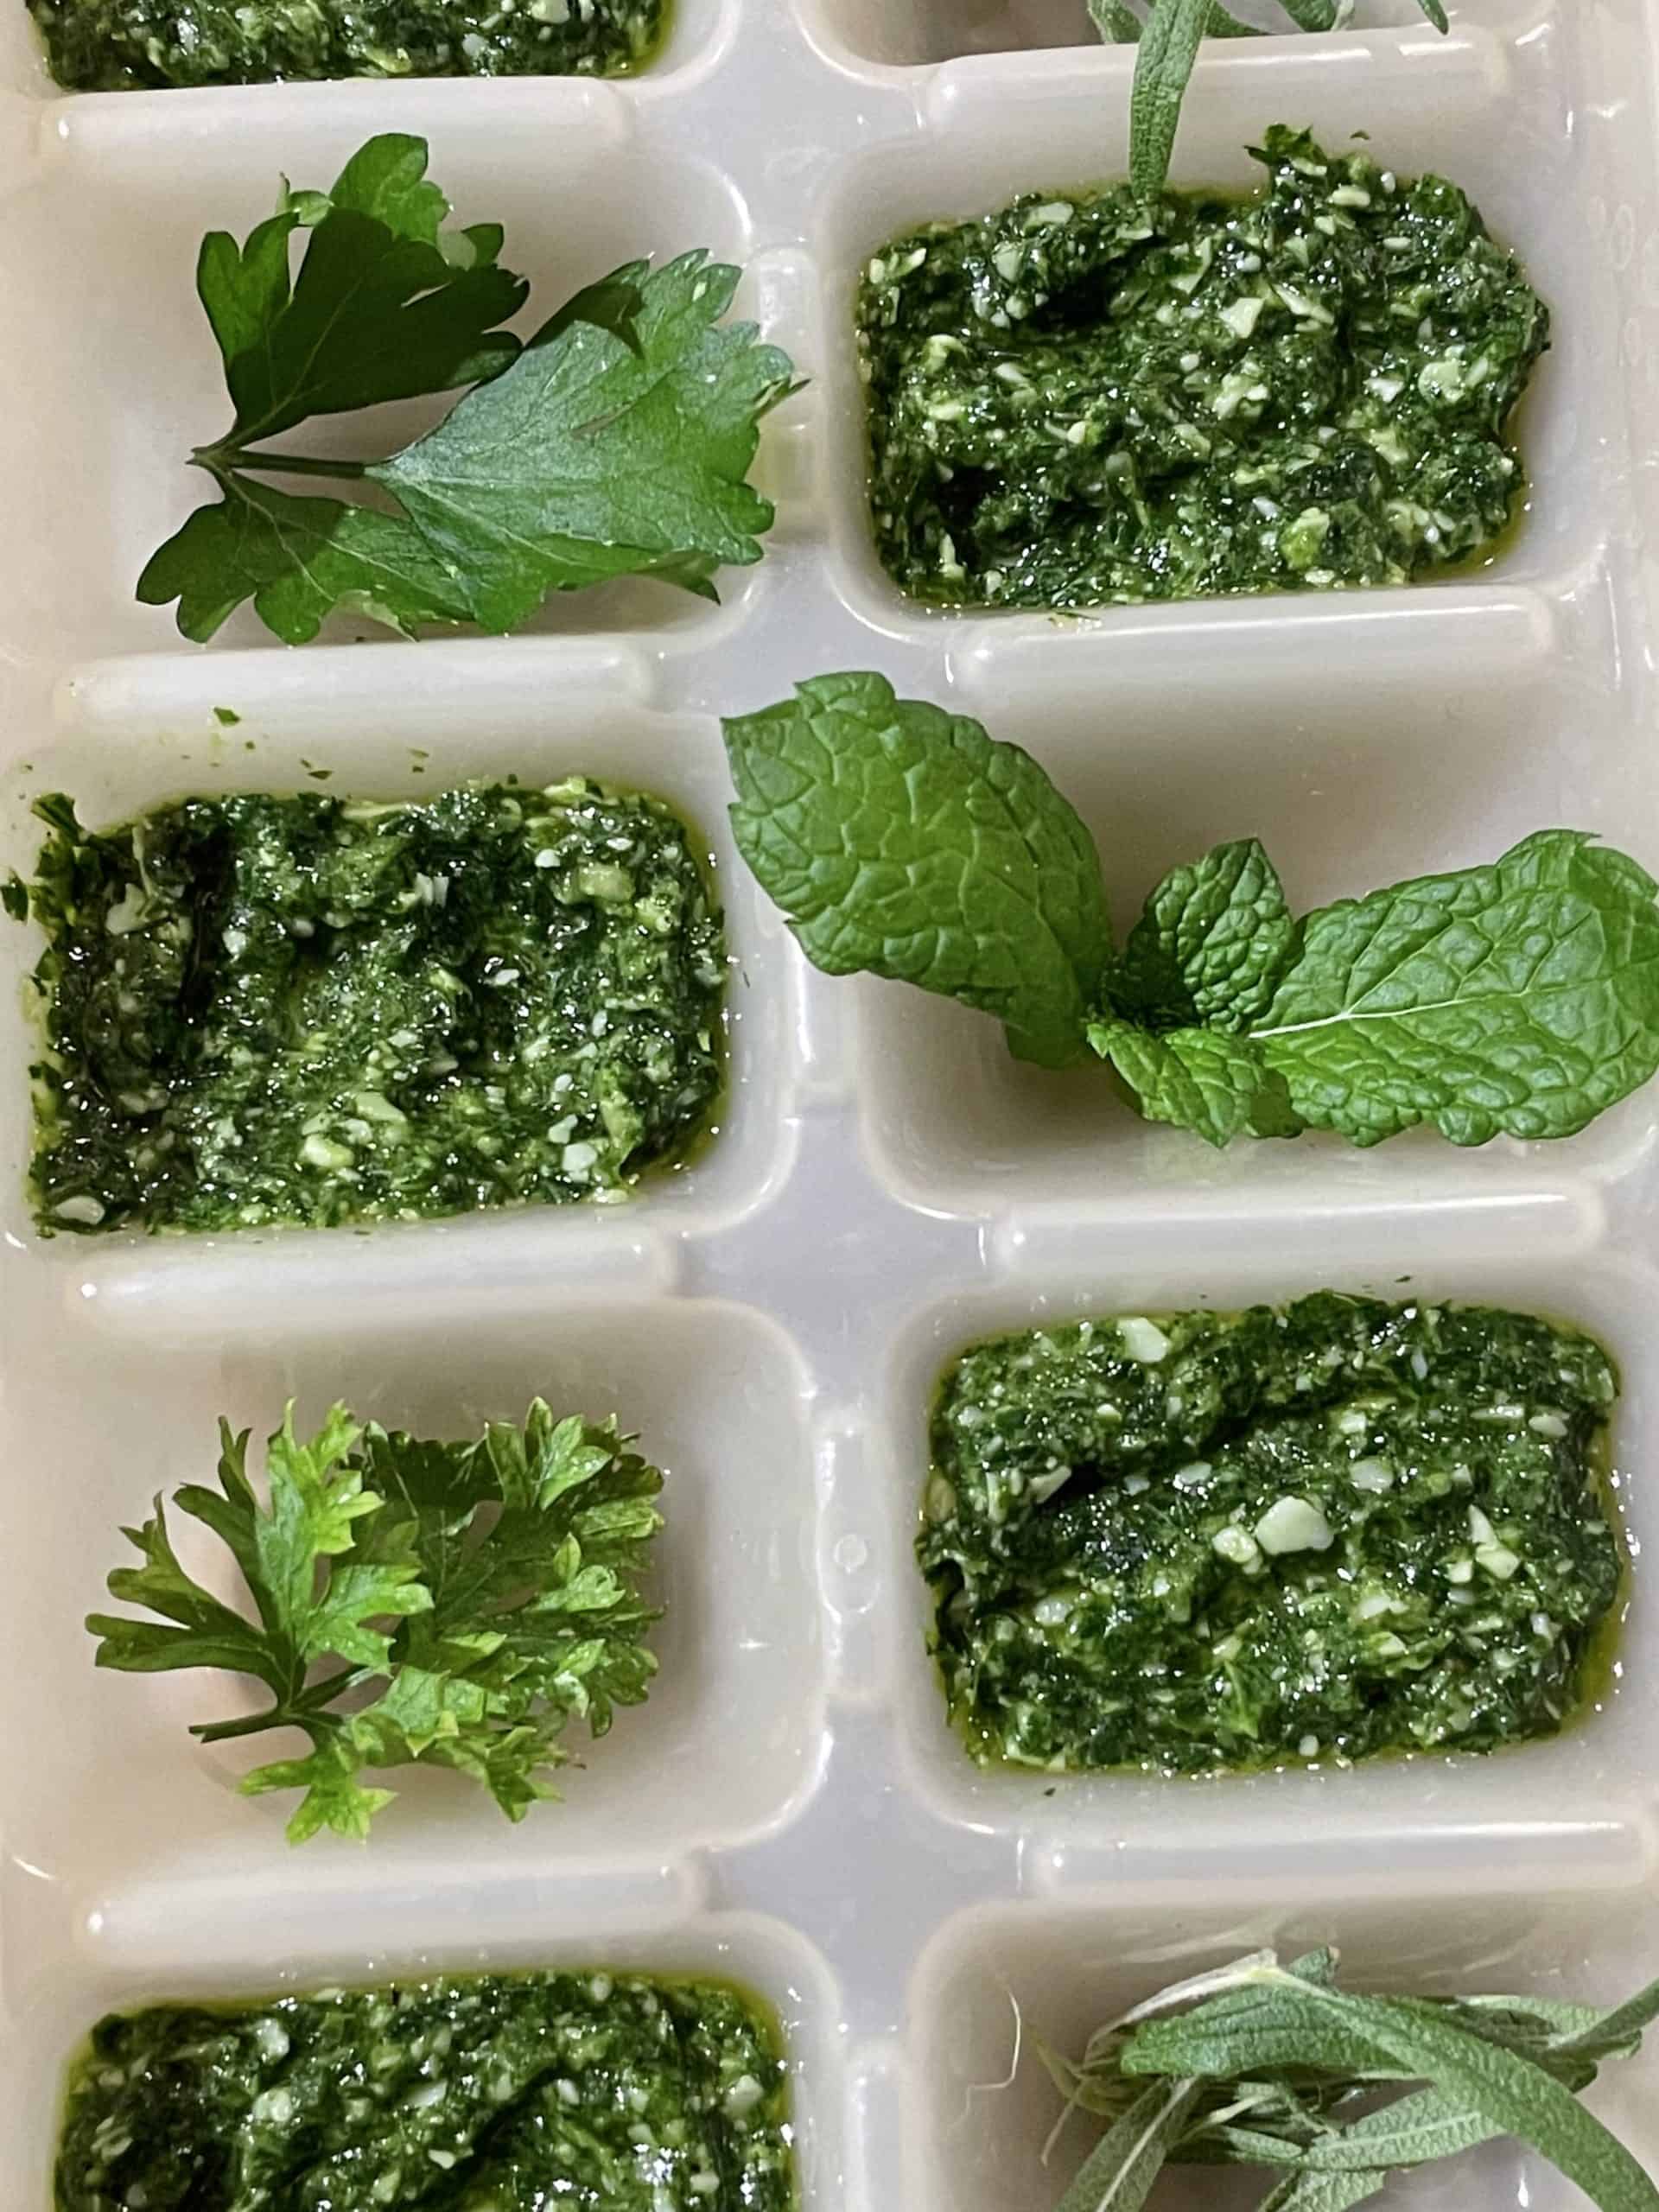 Freeze unused pesto in an ice tray for later use.